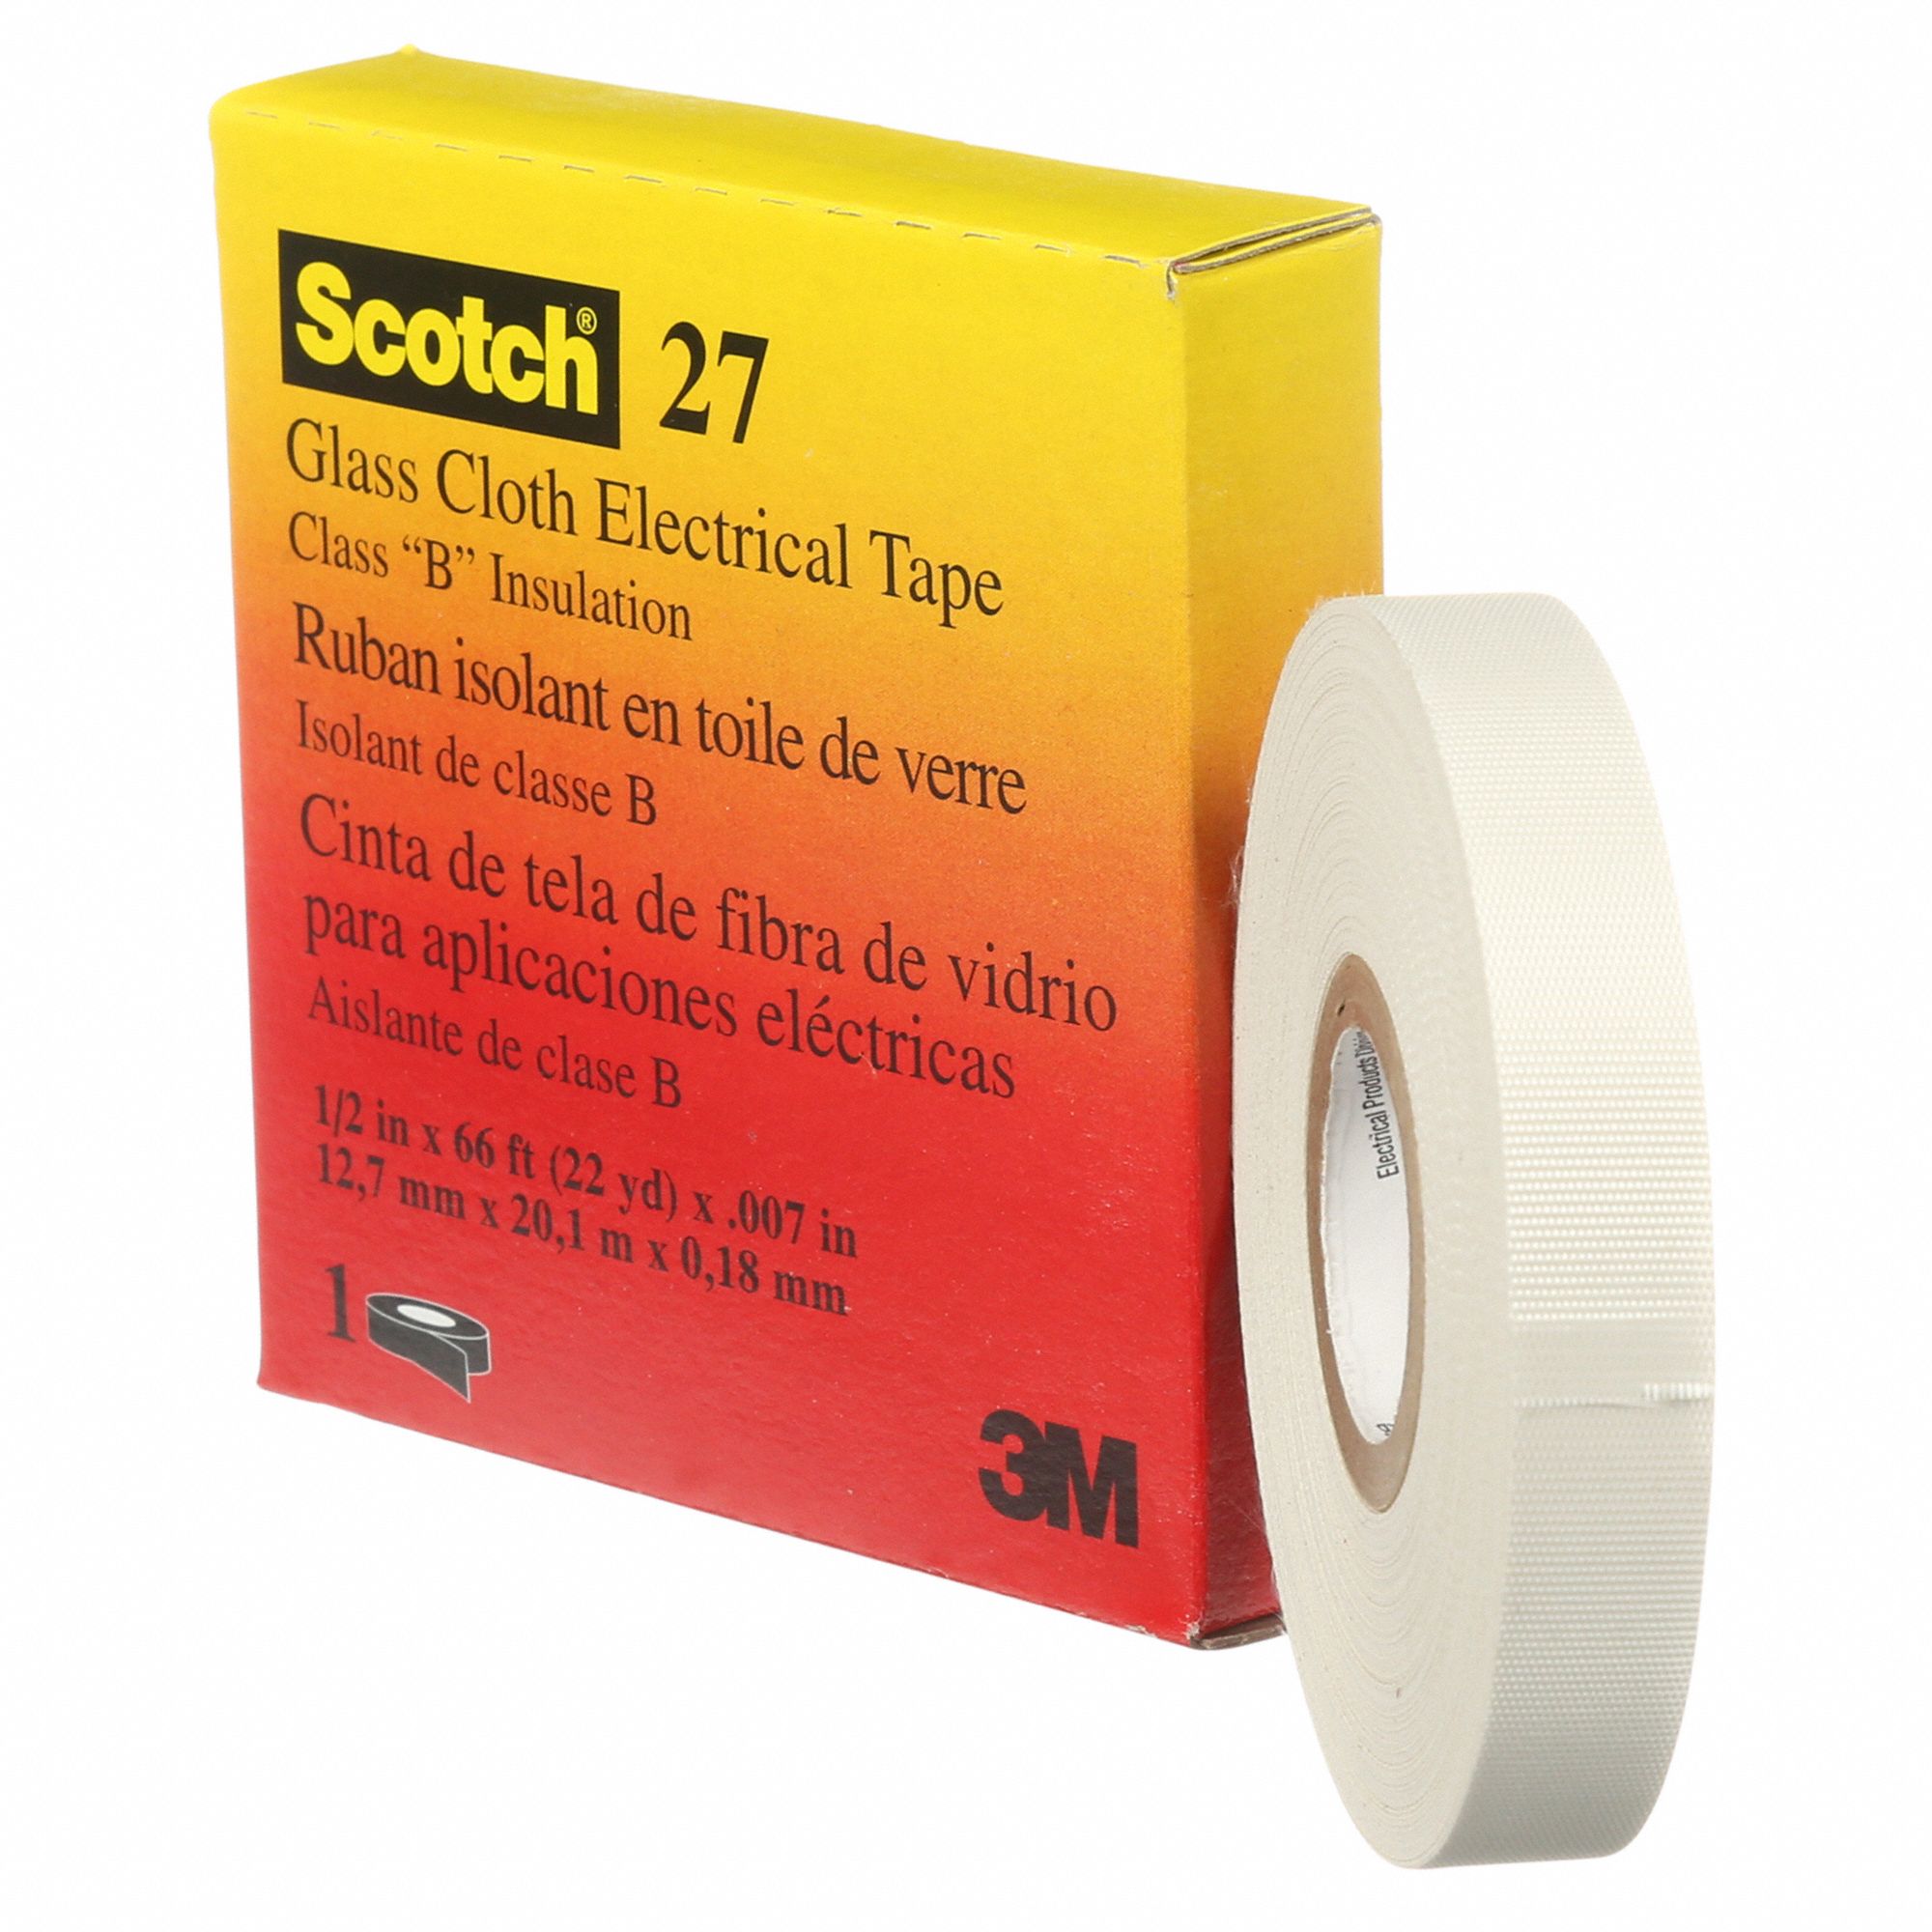 3M Insulating Electrical Tape: Abrasion-Resistant, 3M™, Scotch®, 27 ...